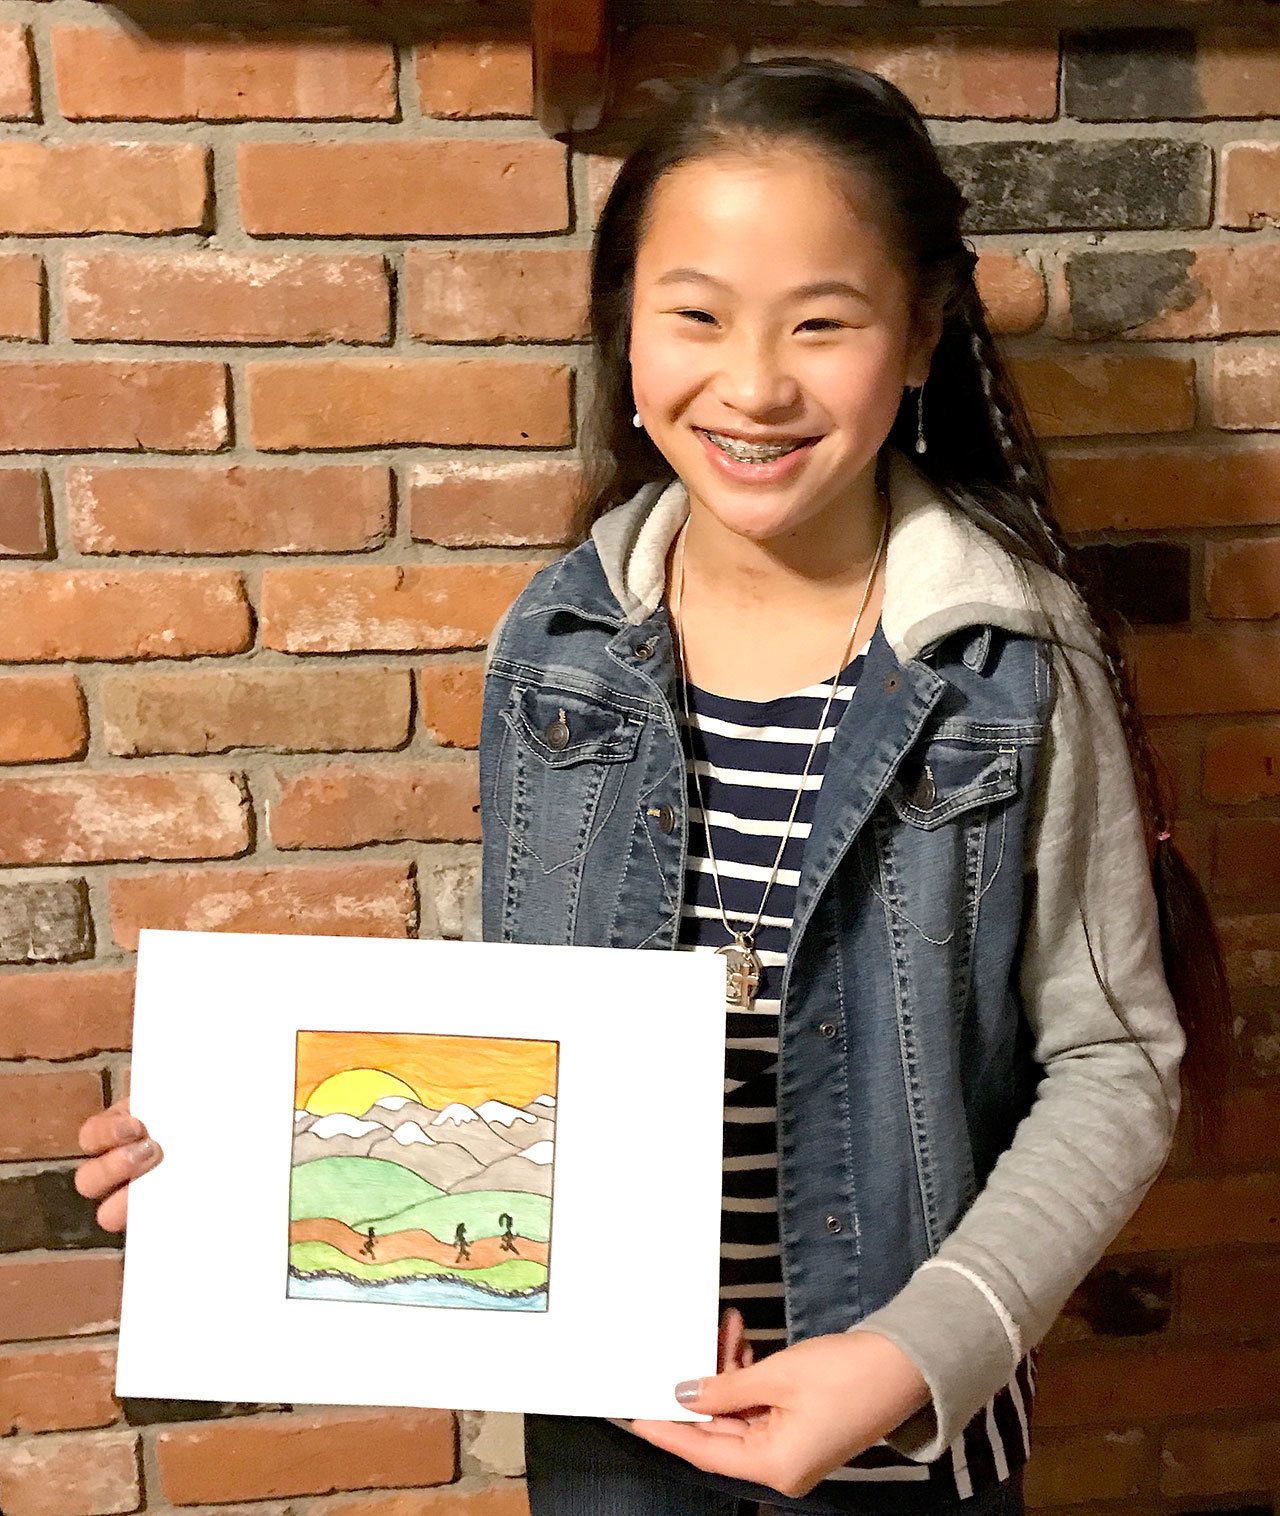 Lilly Sanders, 12, and her winning medal design for the North Olympic Discovery Marathon.